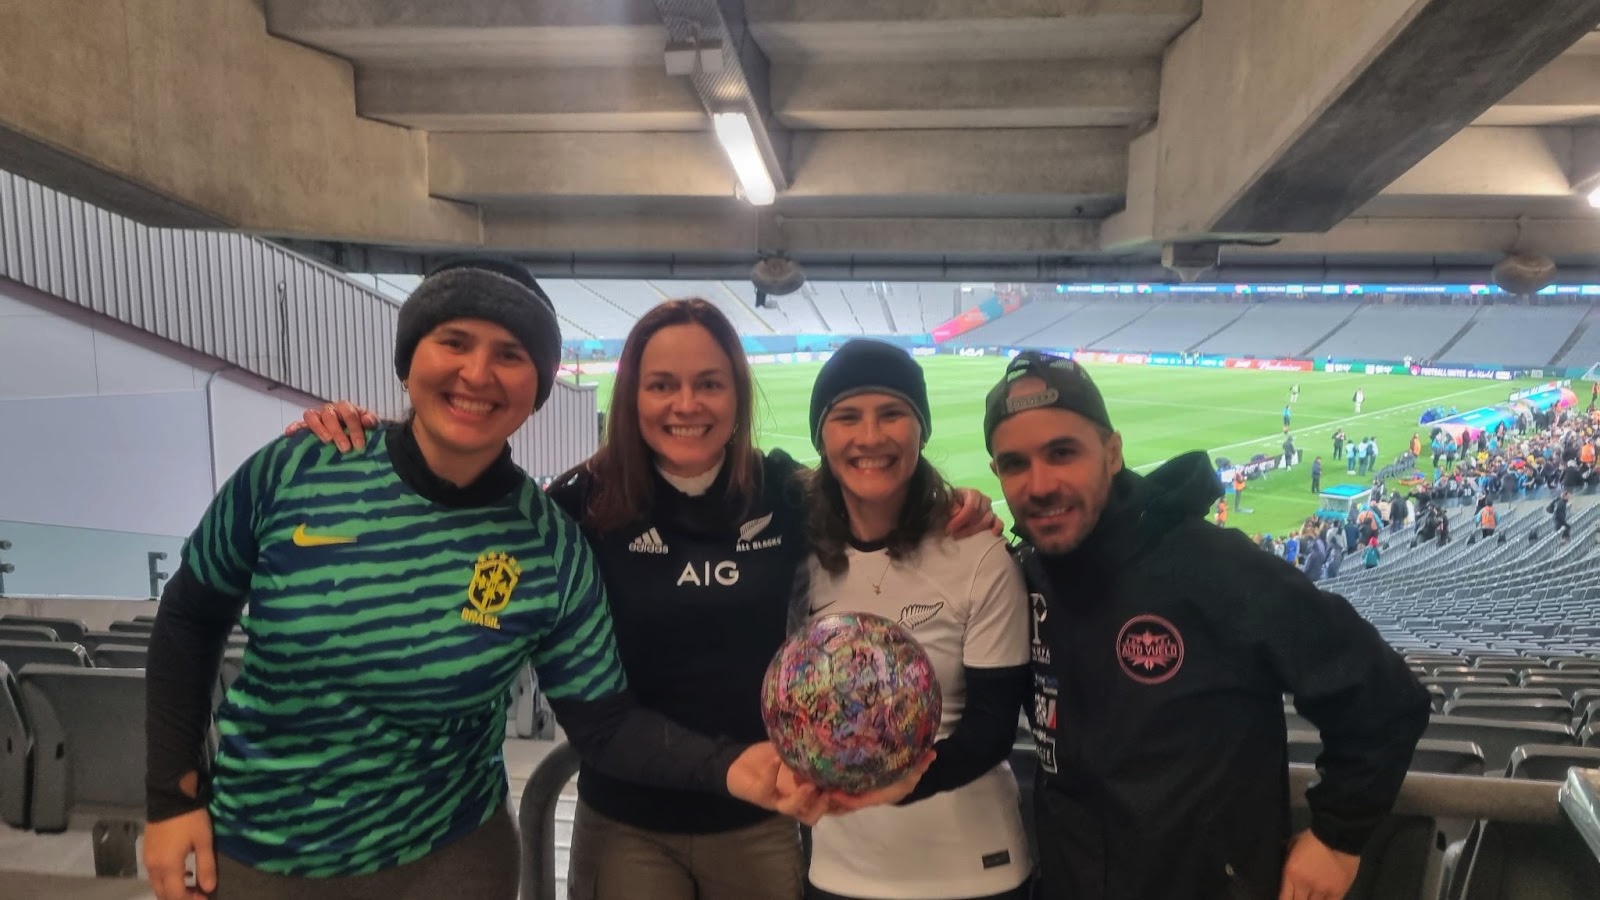 Kristin’s Samba band colleagues and The Ball in the stadium